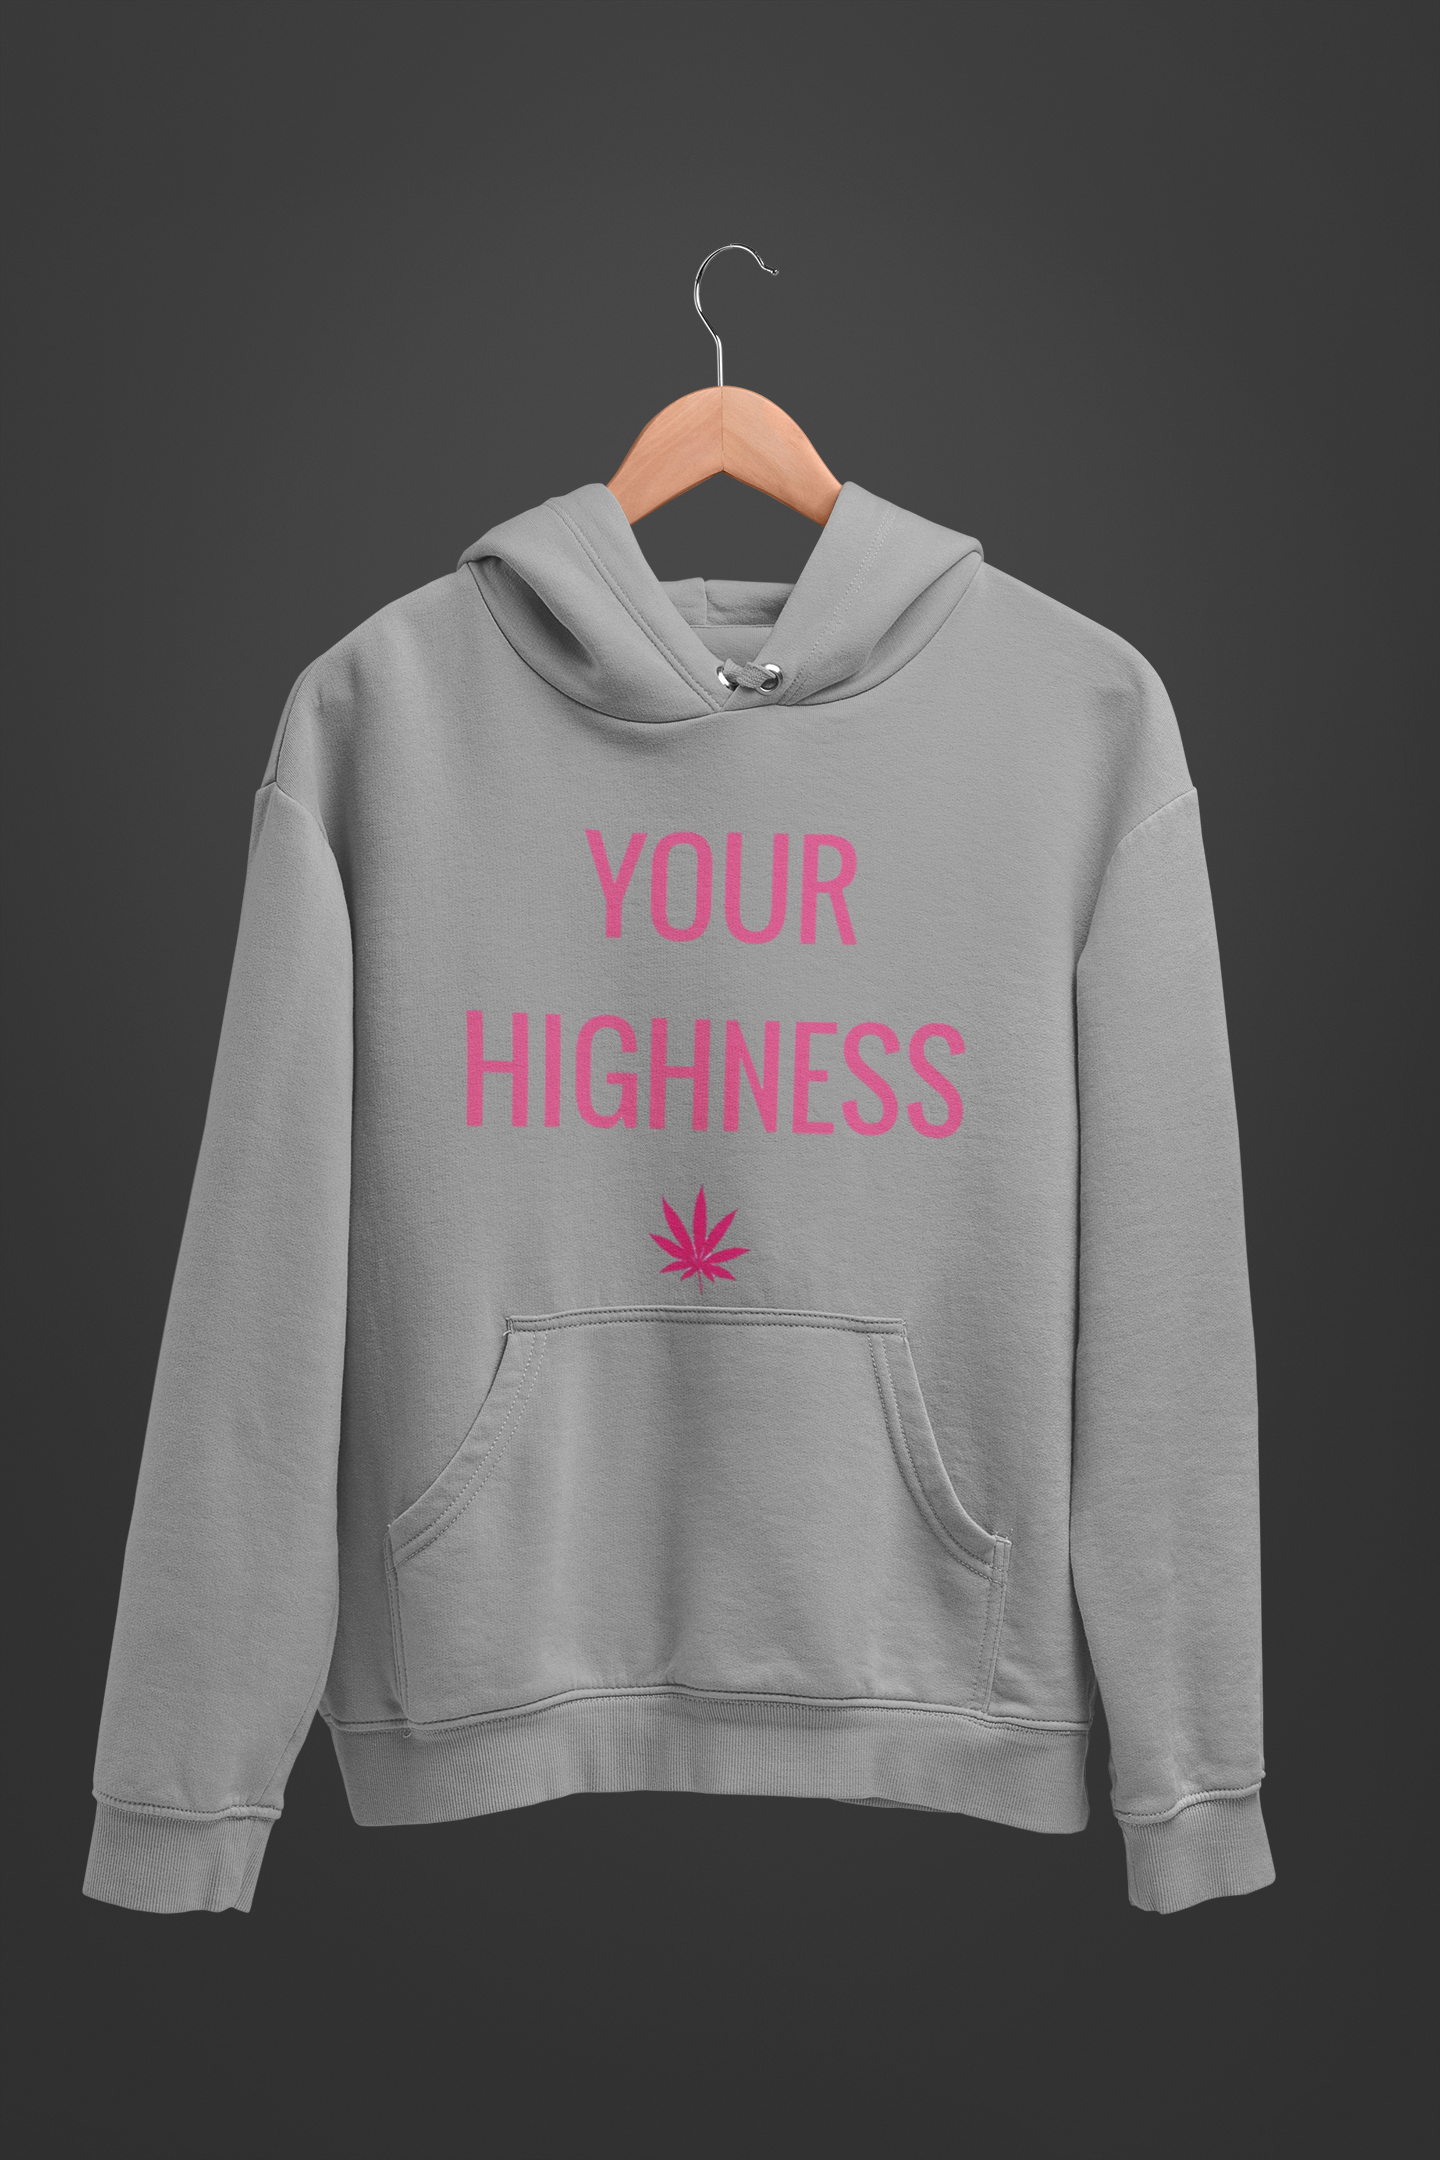 Your Highness Stoner Hoodie - Insane Tees